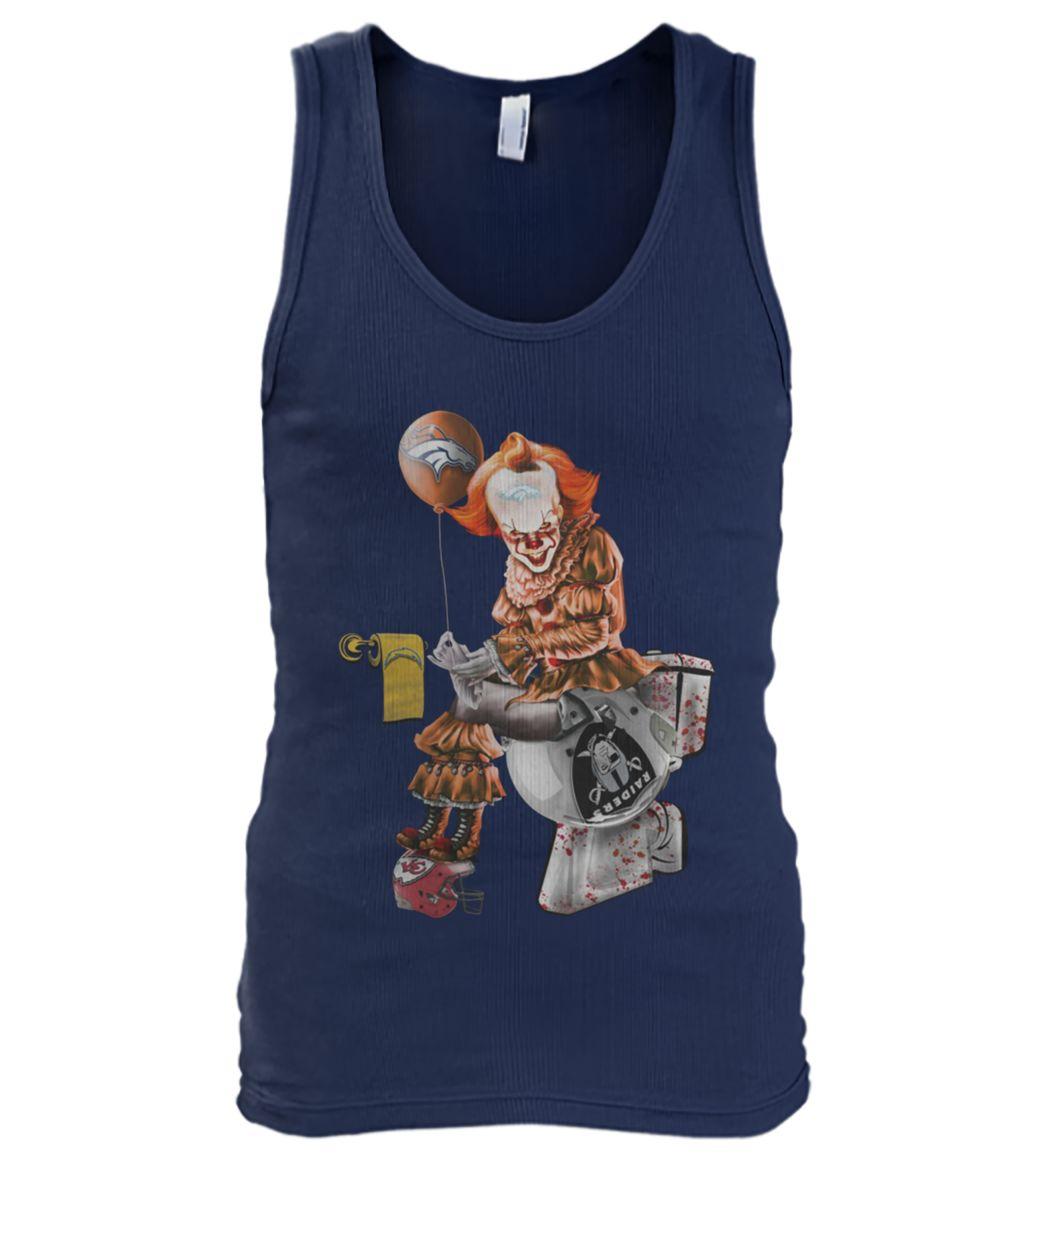 It pennywise denver broncos sitting on oakland raiders tank top